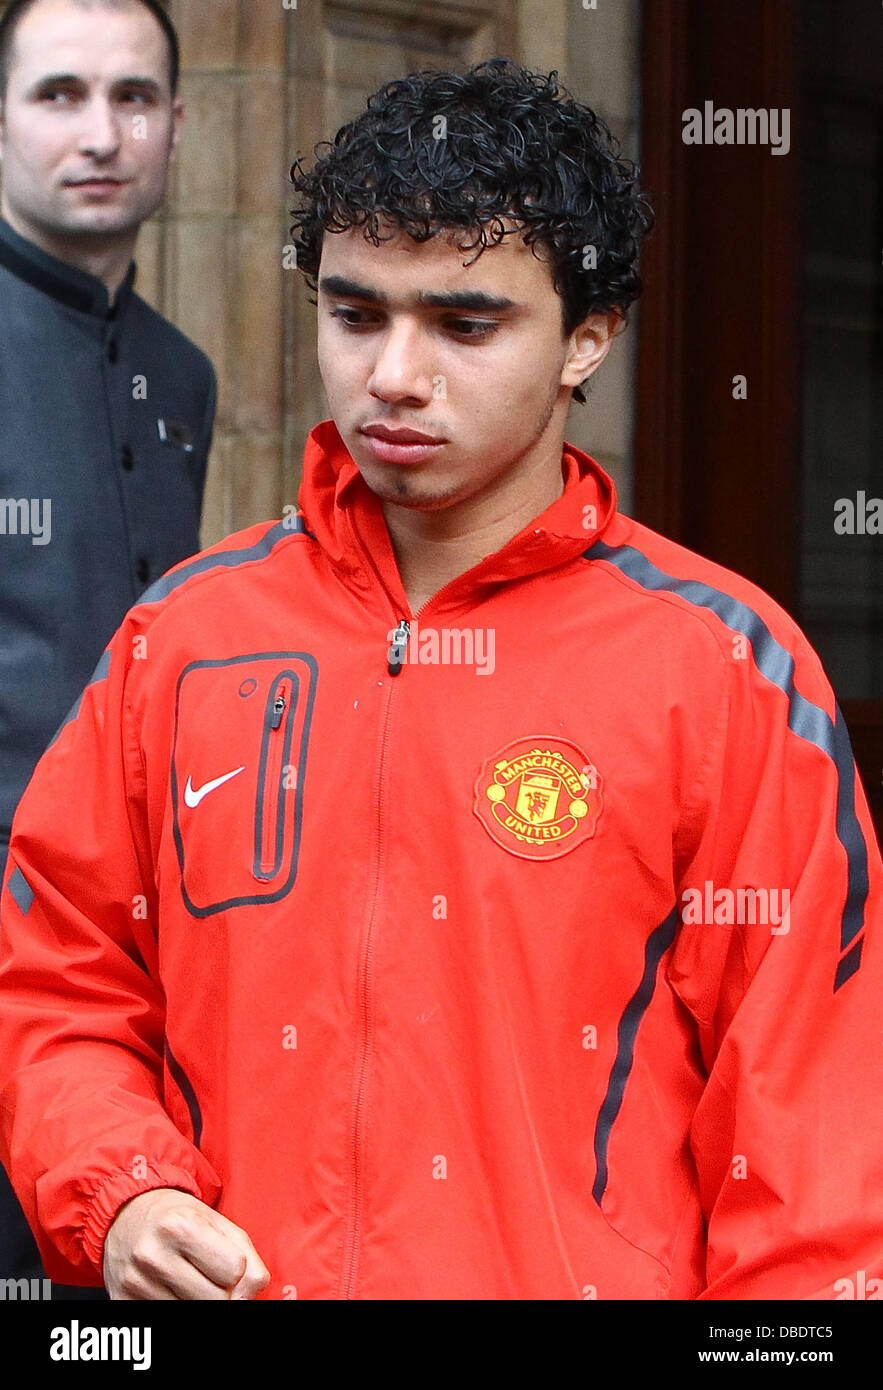 Rafael Pereira da Silva The Manchester United team and management leave their London hotel after being beaten by FC Barcelona in the Champions League Final (28May11) London, England - 29.05.11 Stock Photo